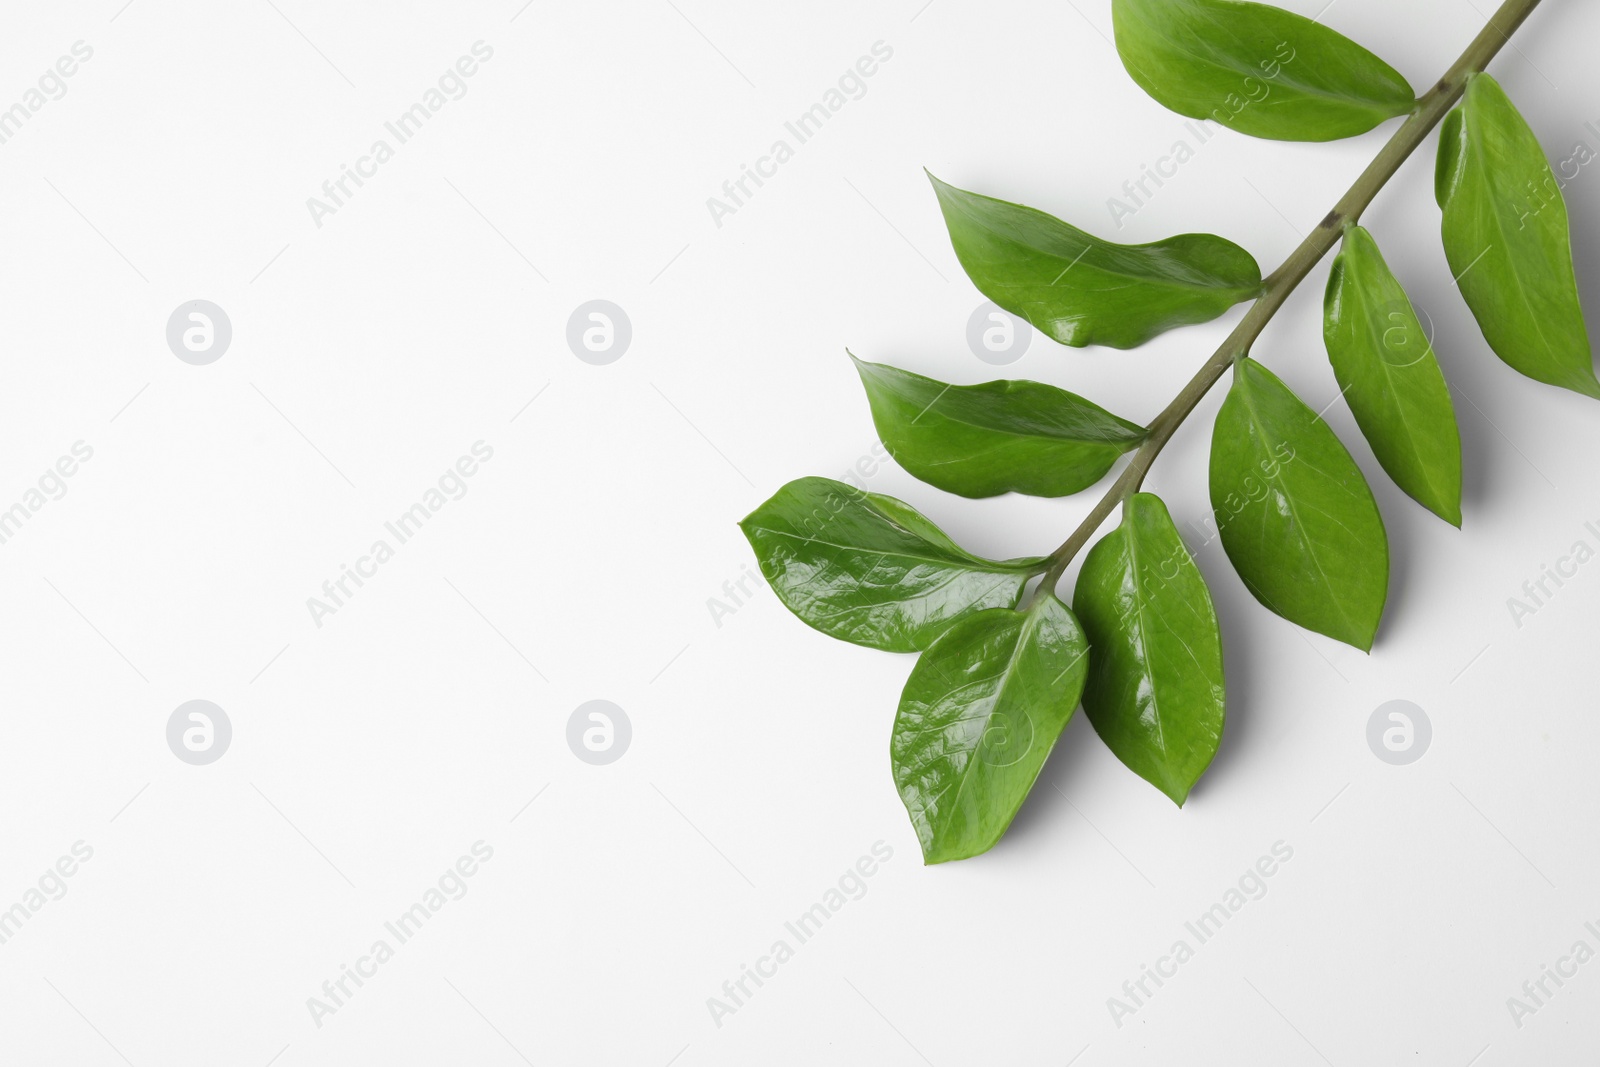 Photo of Tropical zamioculcas plant branch with leaves on white background